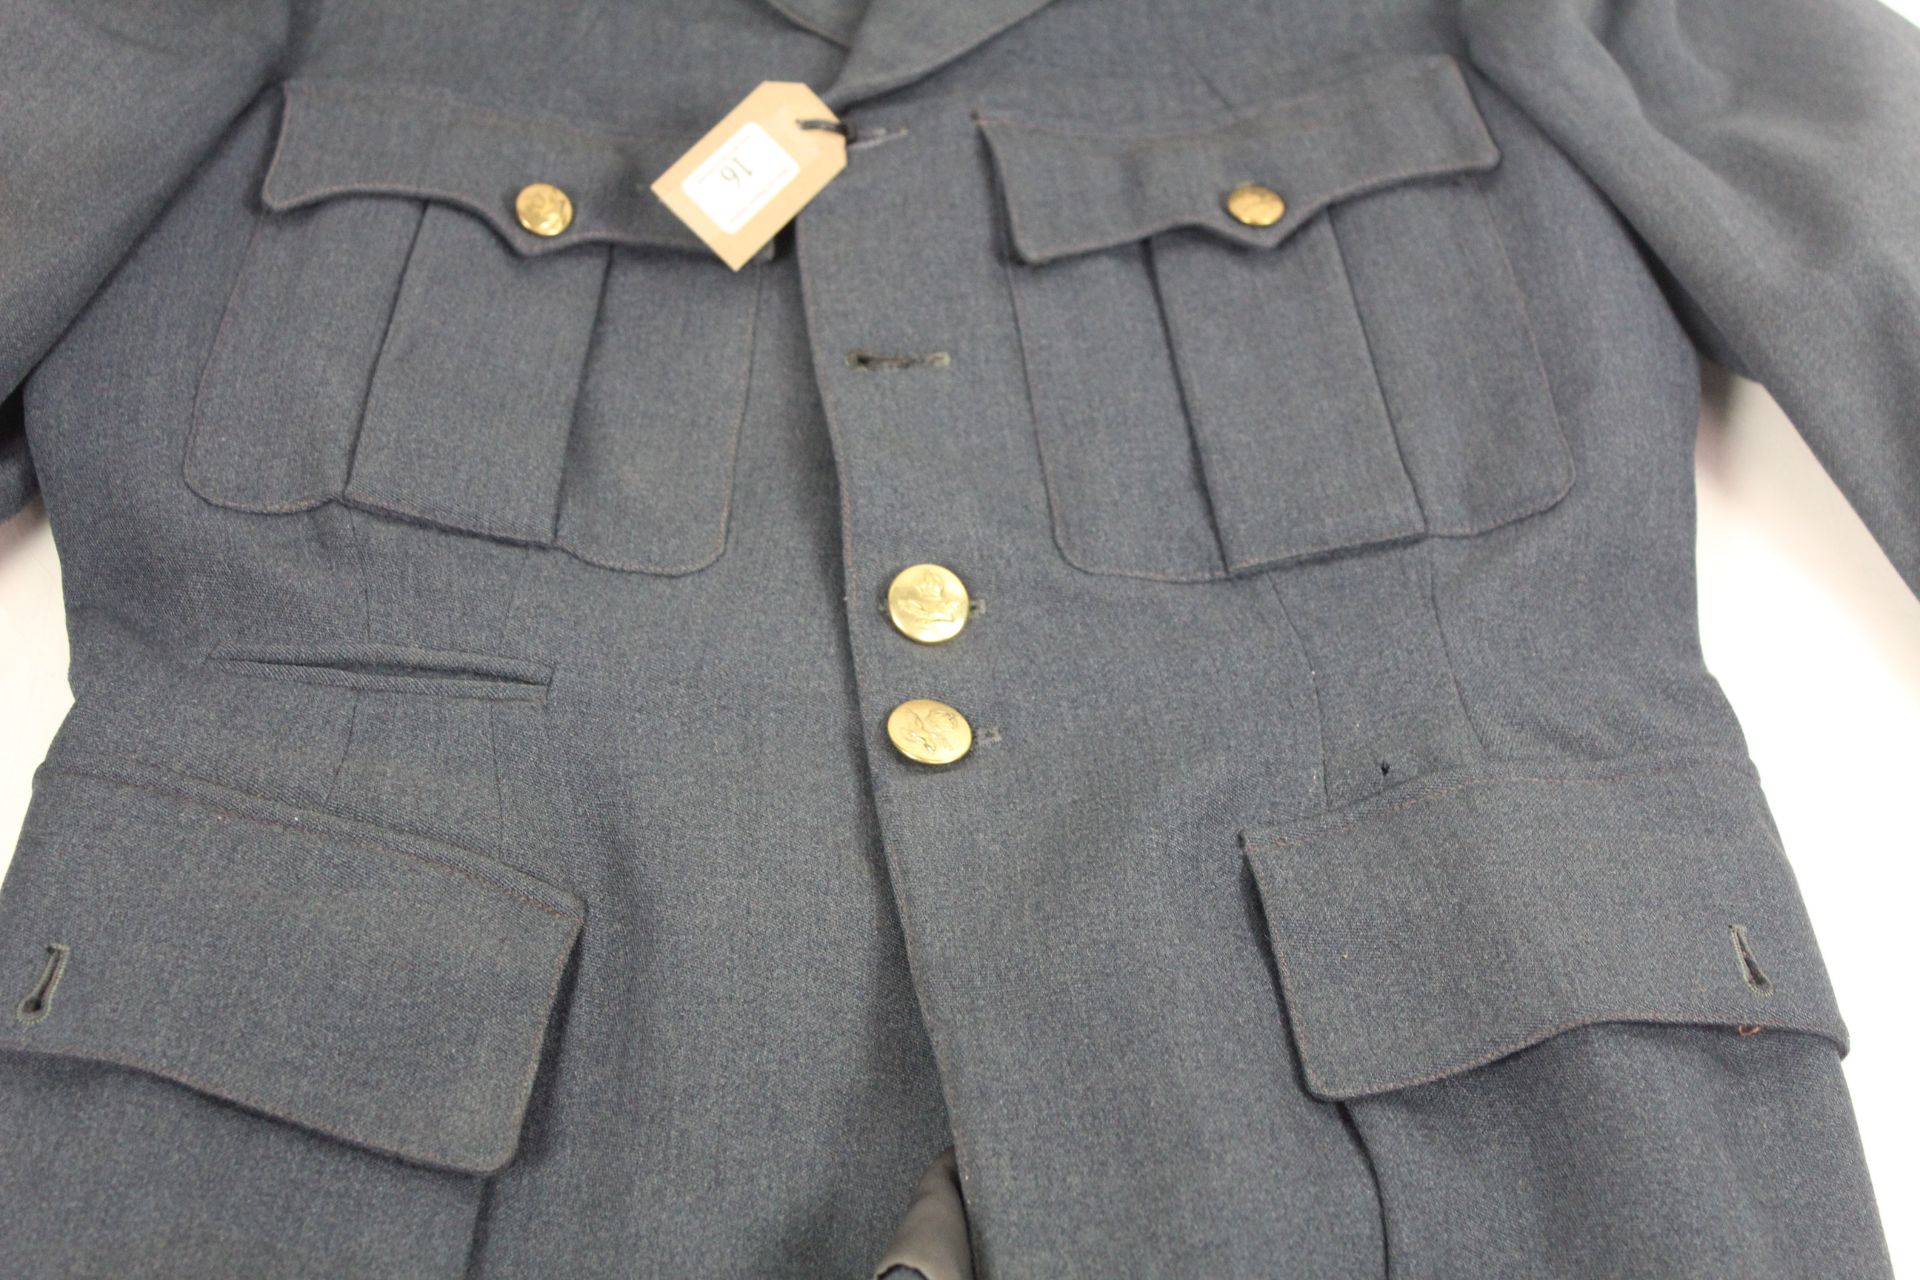 An R.A.F. Officers service jacket with Kings Crown - Image 5 of 14